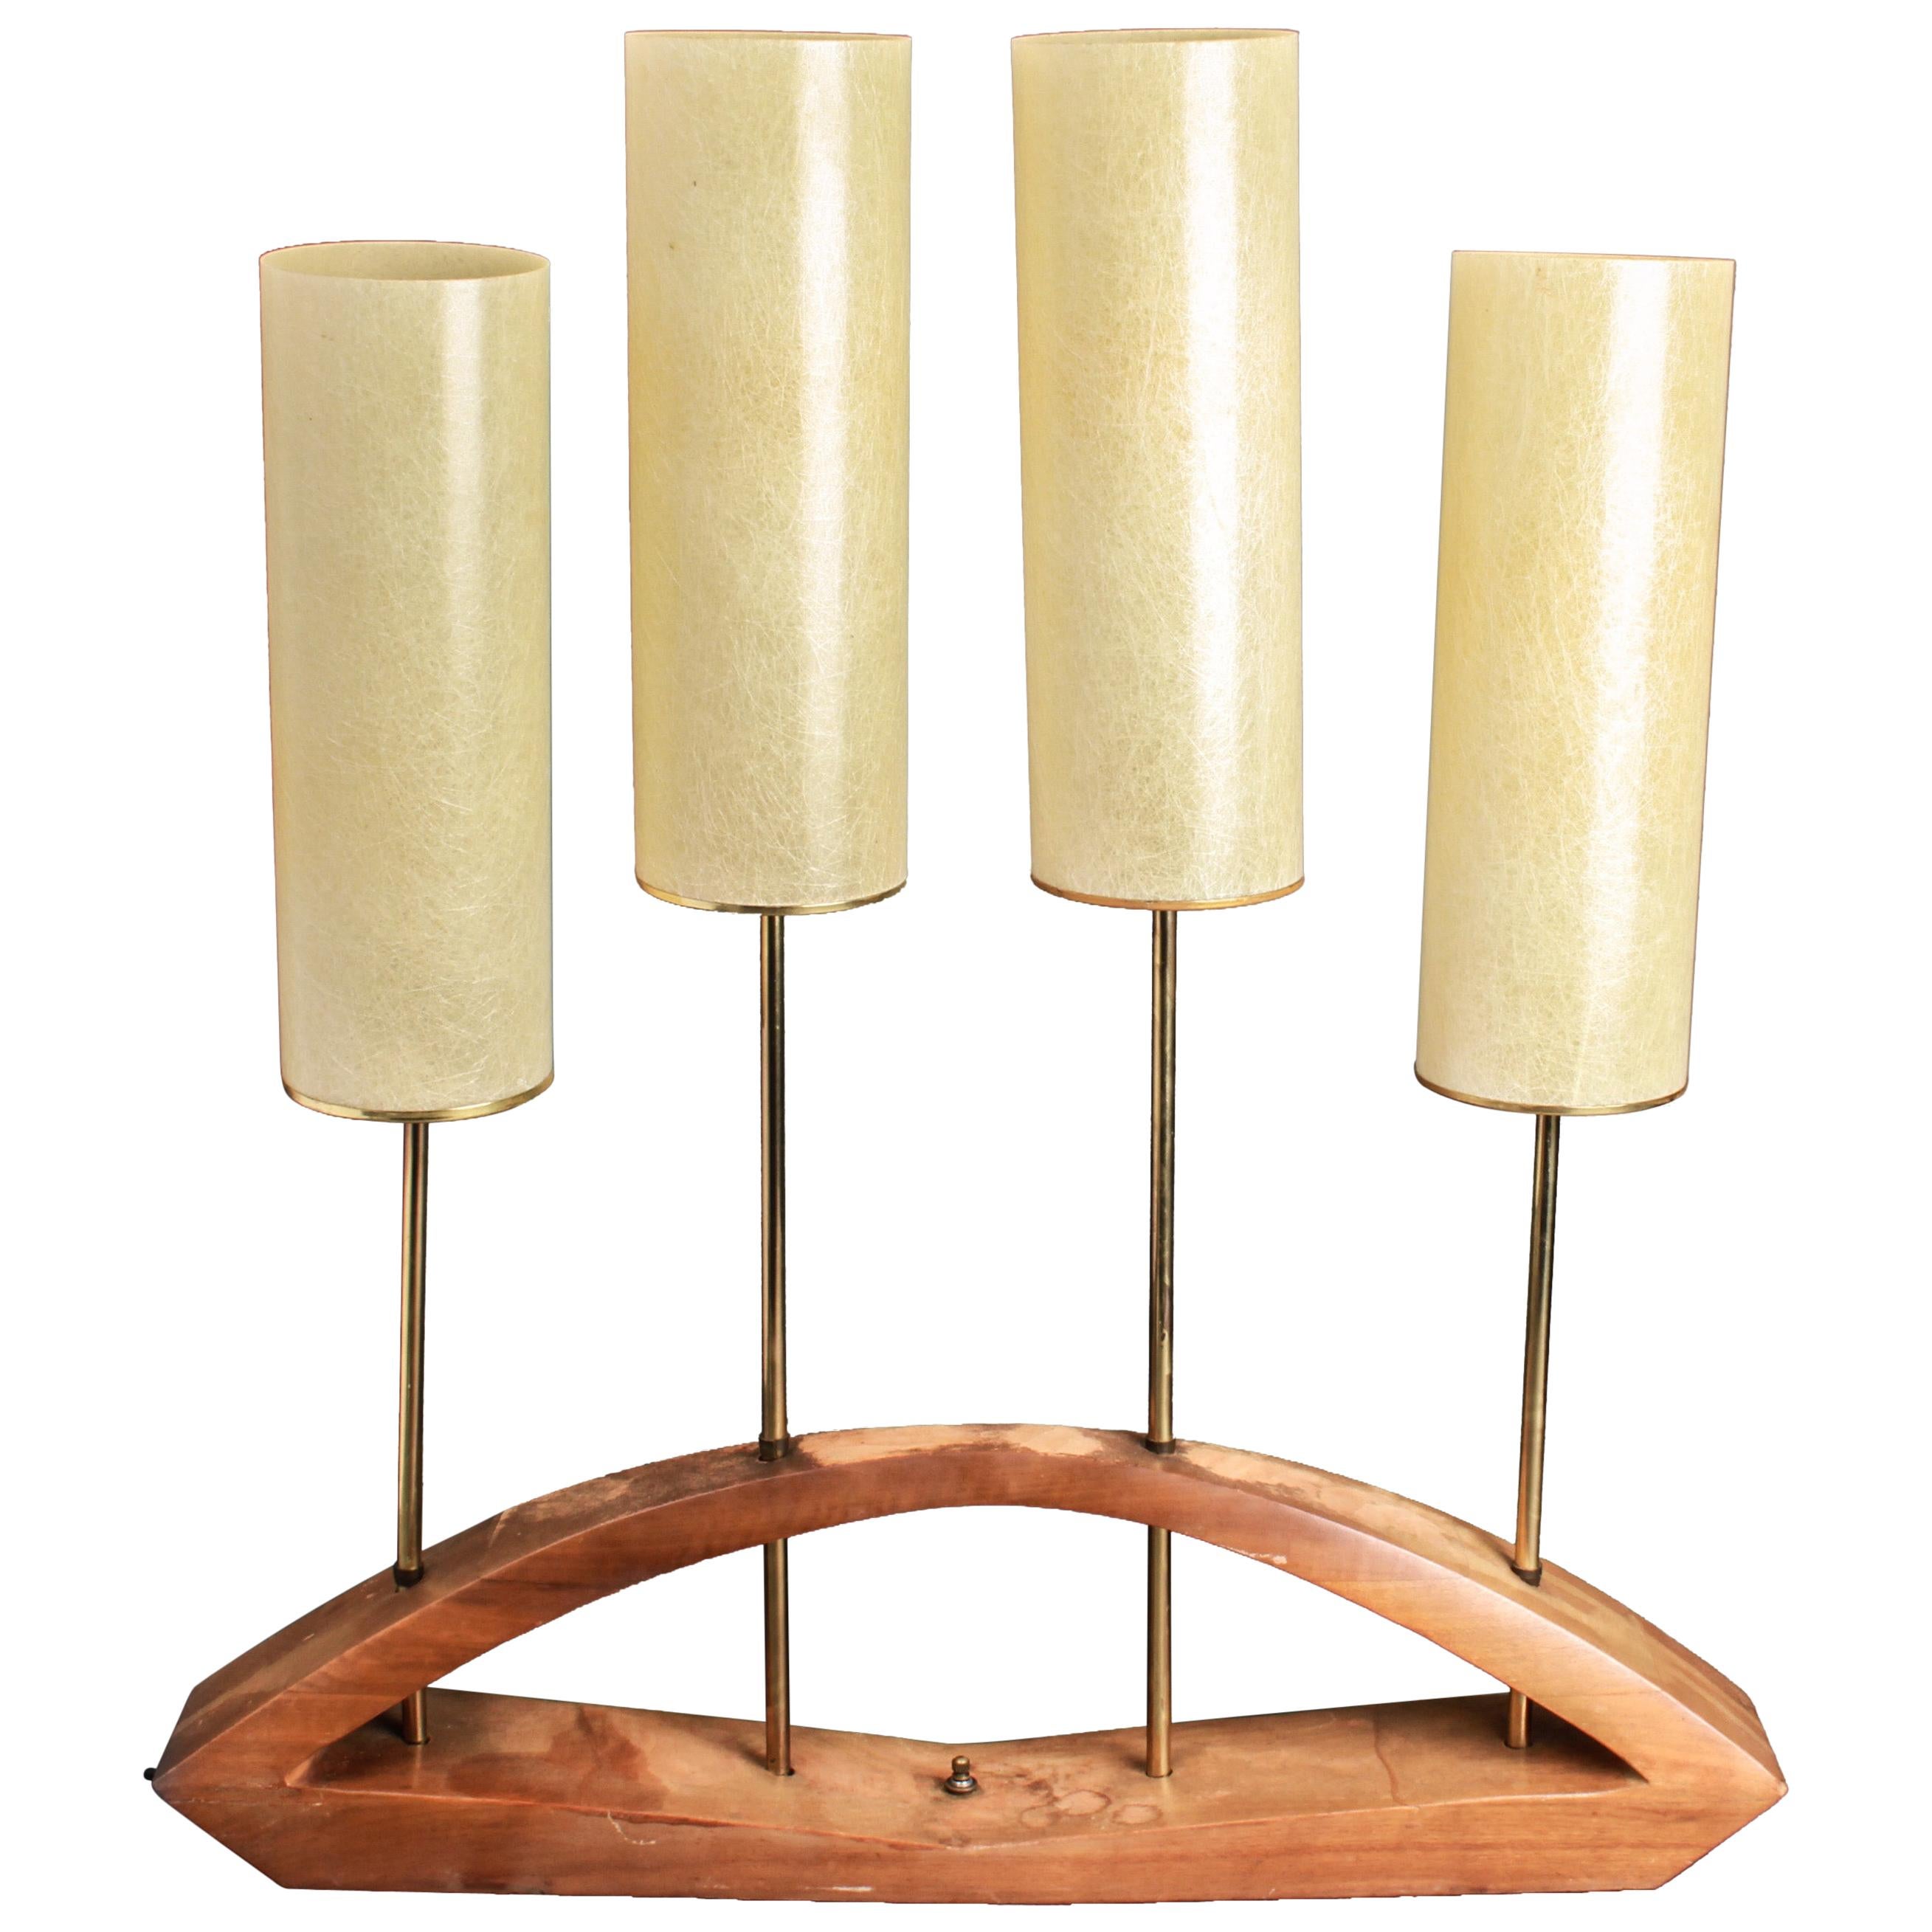 Mid-Century Modern Four-Light Table Lamp With Wood Base